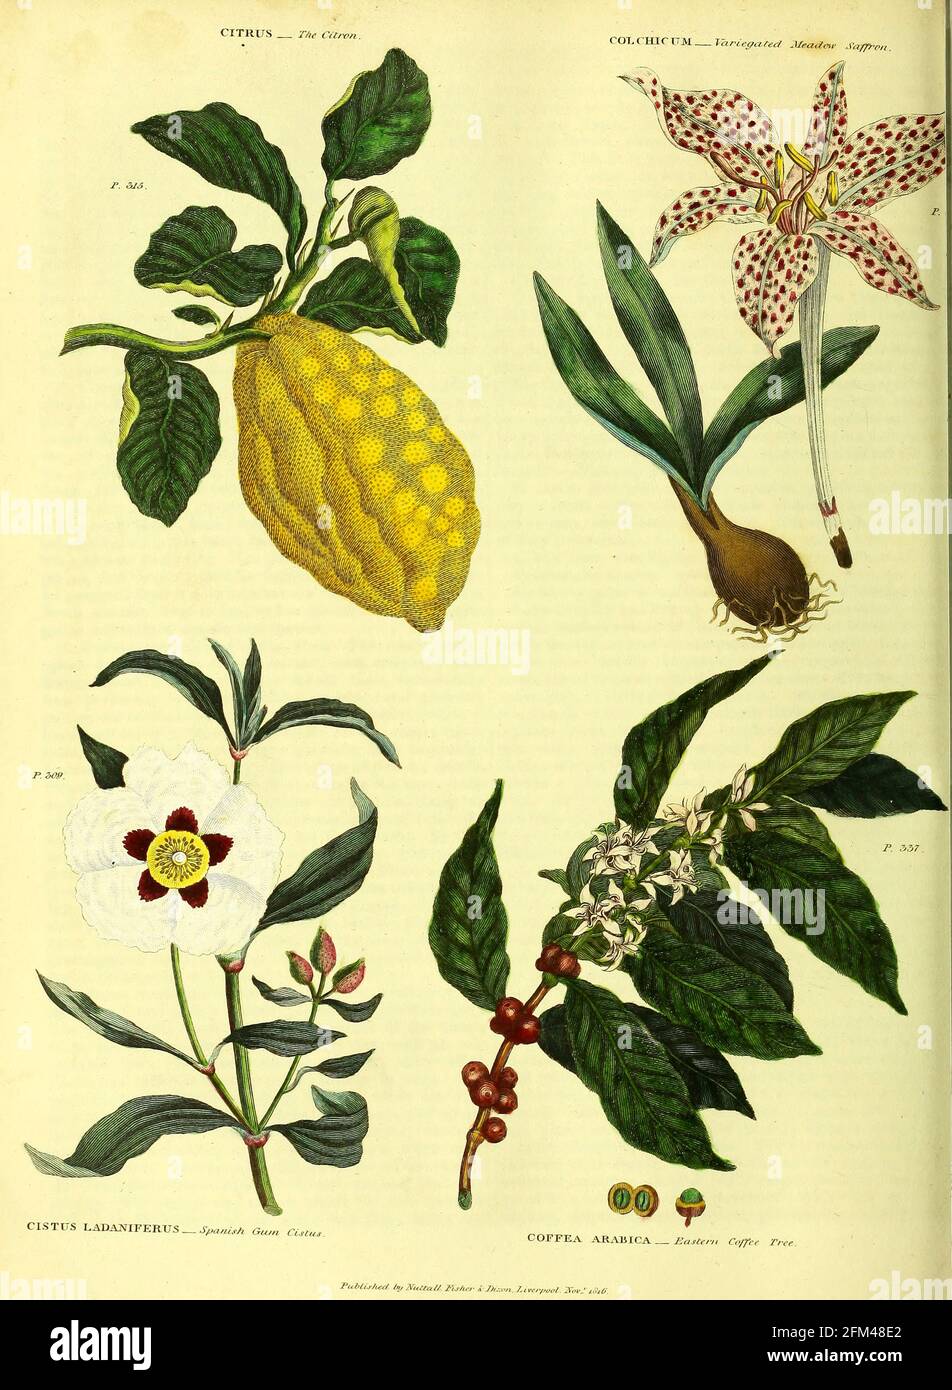 Citrus [Citron] Colchicum [Variegated Meadow Saffron] Cistus landaniferus [Spanish Gum Cistus] Coffea Arabica [Eastern Coffee Tree] from Vol 1 of the book The universal herbal : or botanical, medical and agricultural dictionary : containing an account of all known plants in the world, arranged according to the Linnean system. Specifying the uses to which they are or may be applied By Thomas Green,  Published in 1816 by Nuttall, Fisher & Co. in Liverpool and Printed at the Caxton Press by H. Fisher Stock Photo